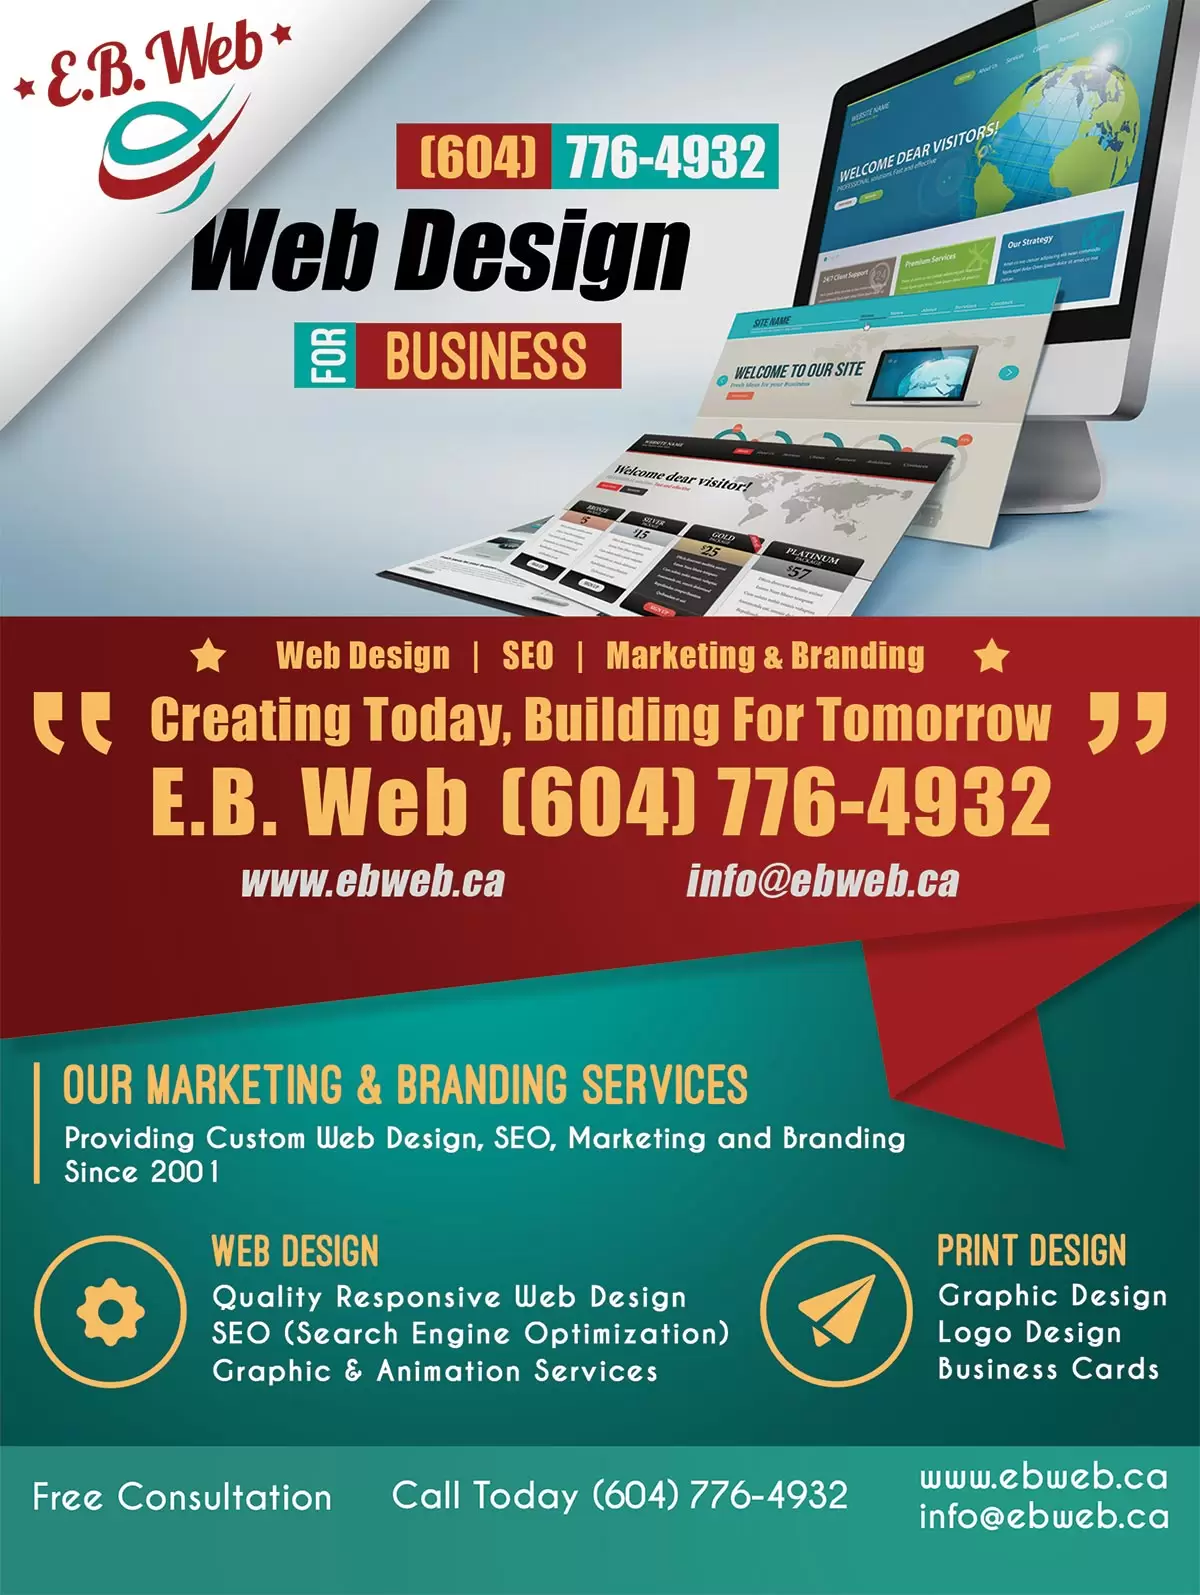 E.B. Web, Web Design For Business Mega Flyer Advertisement For Abbotsford, The Fraser Valley and the Lower Mainland.